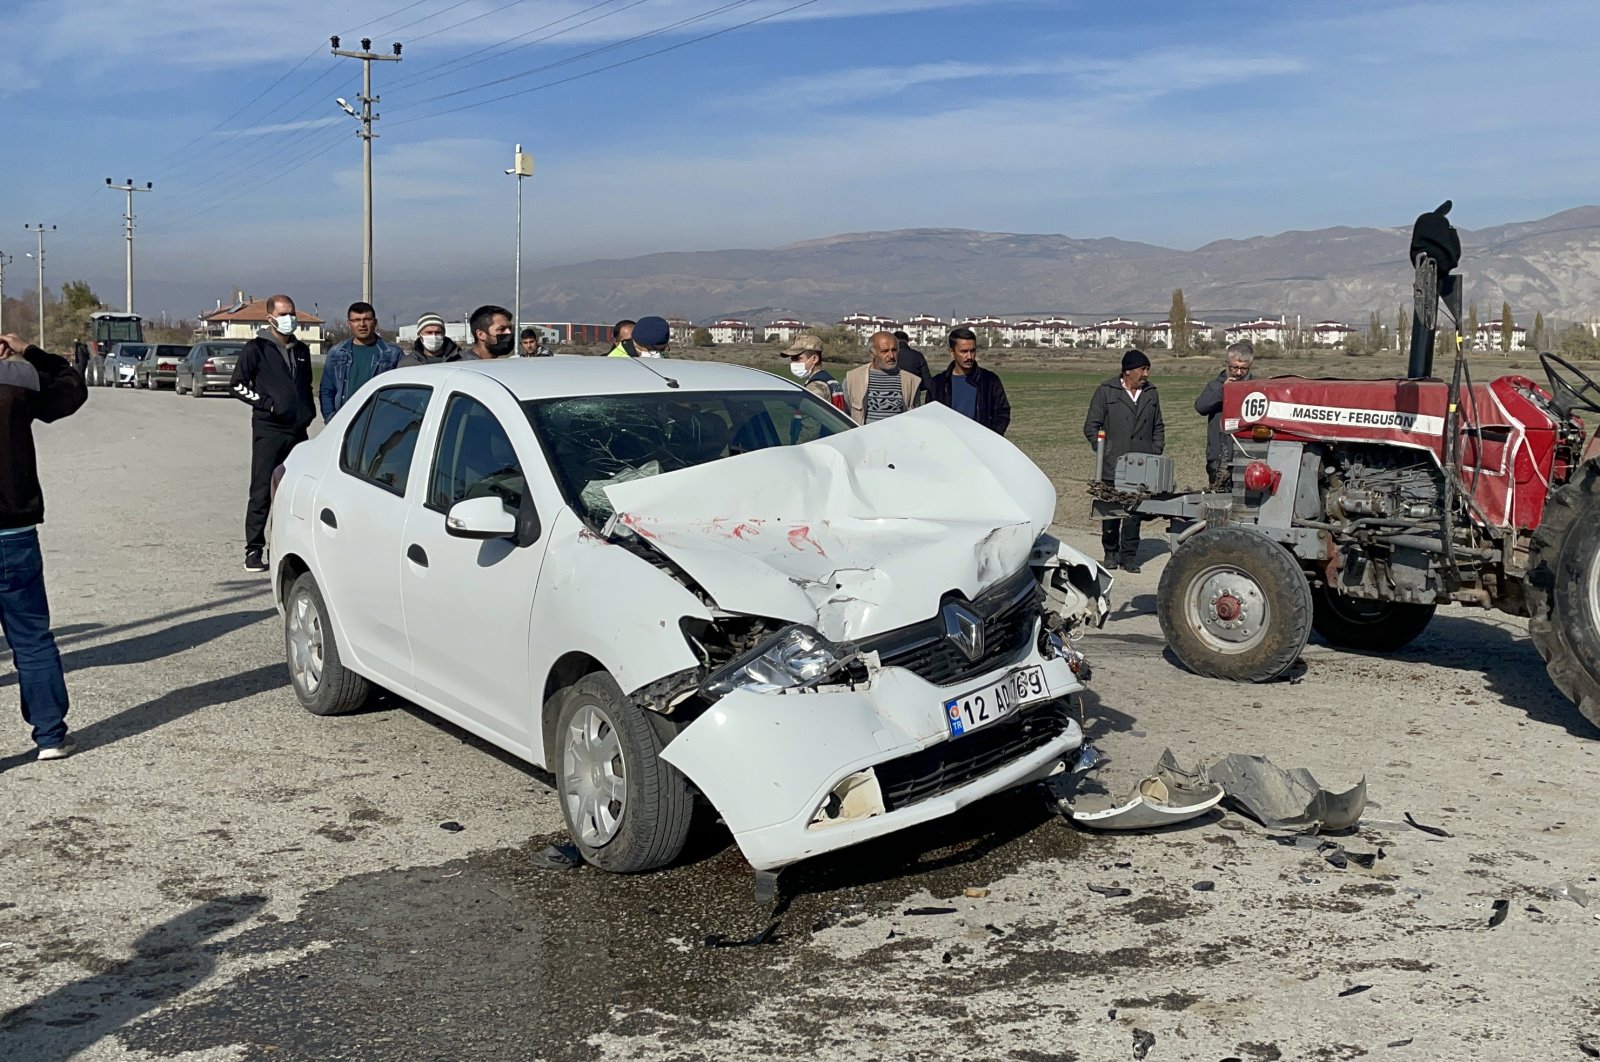 A wrecked car is seen after it crashed into a tractor, in Erzincan, eastern Turkey, Nov. 14, 2021. (AA PHOTO)